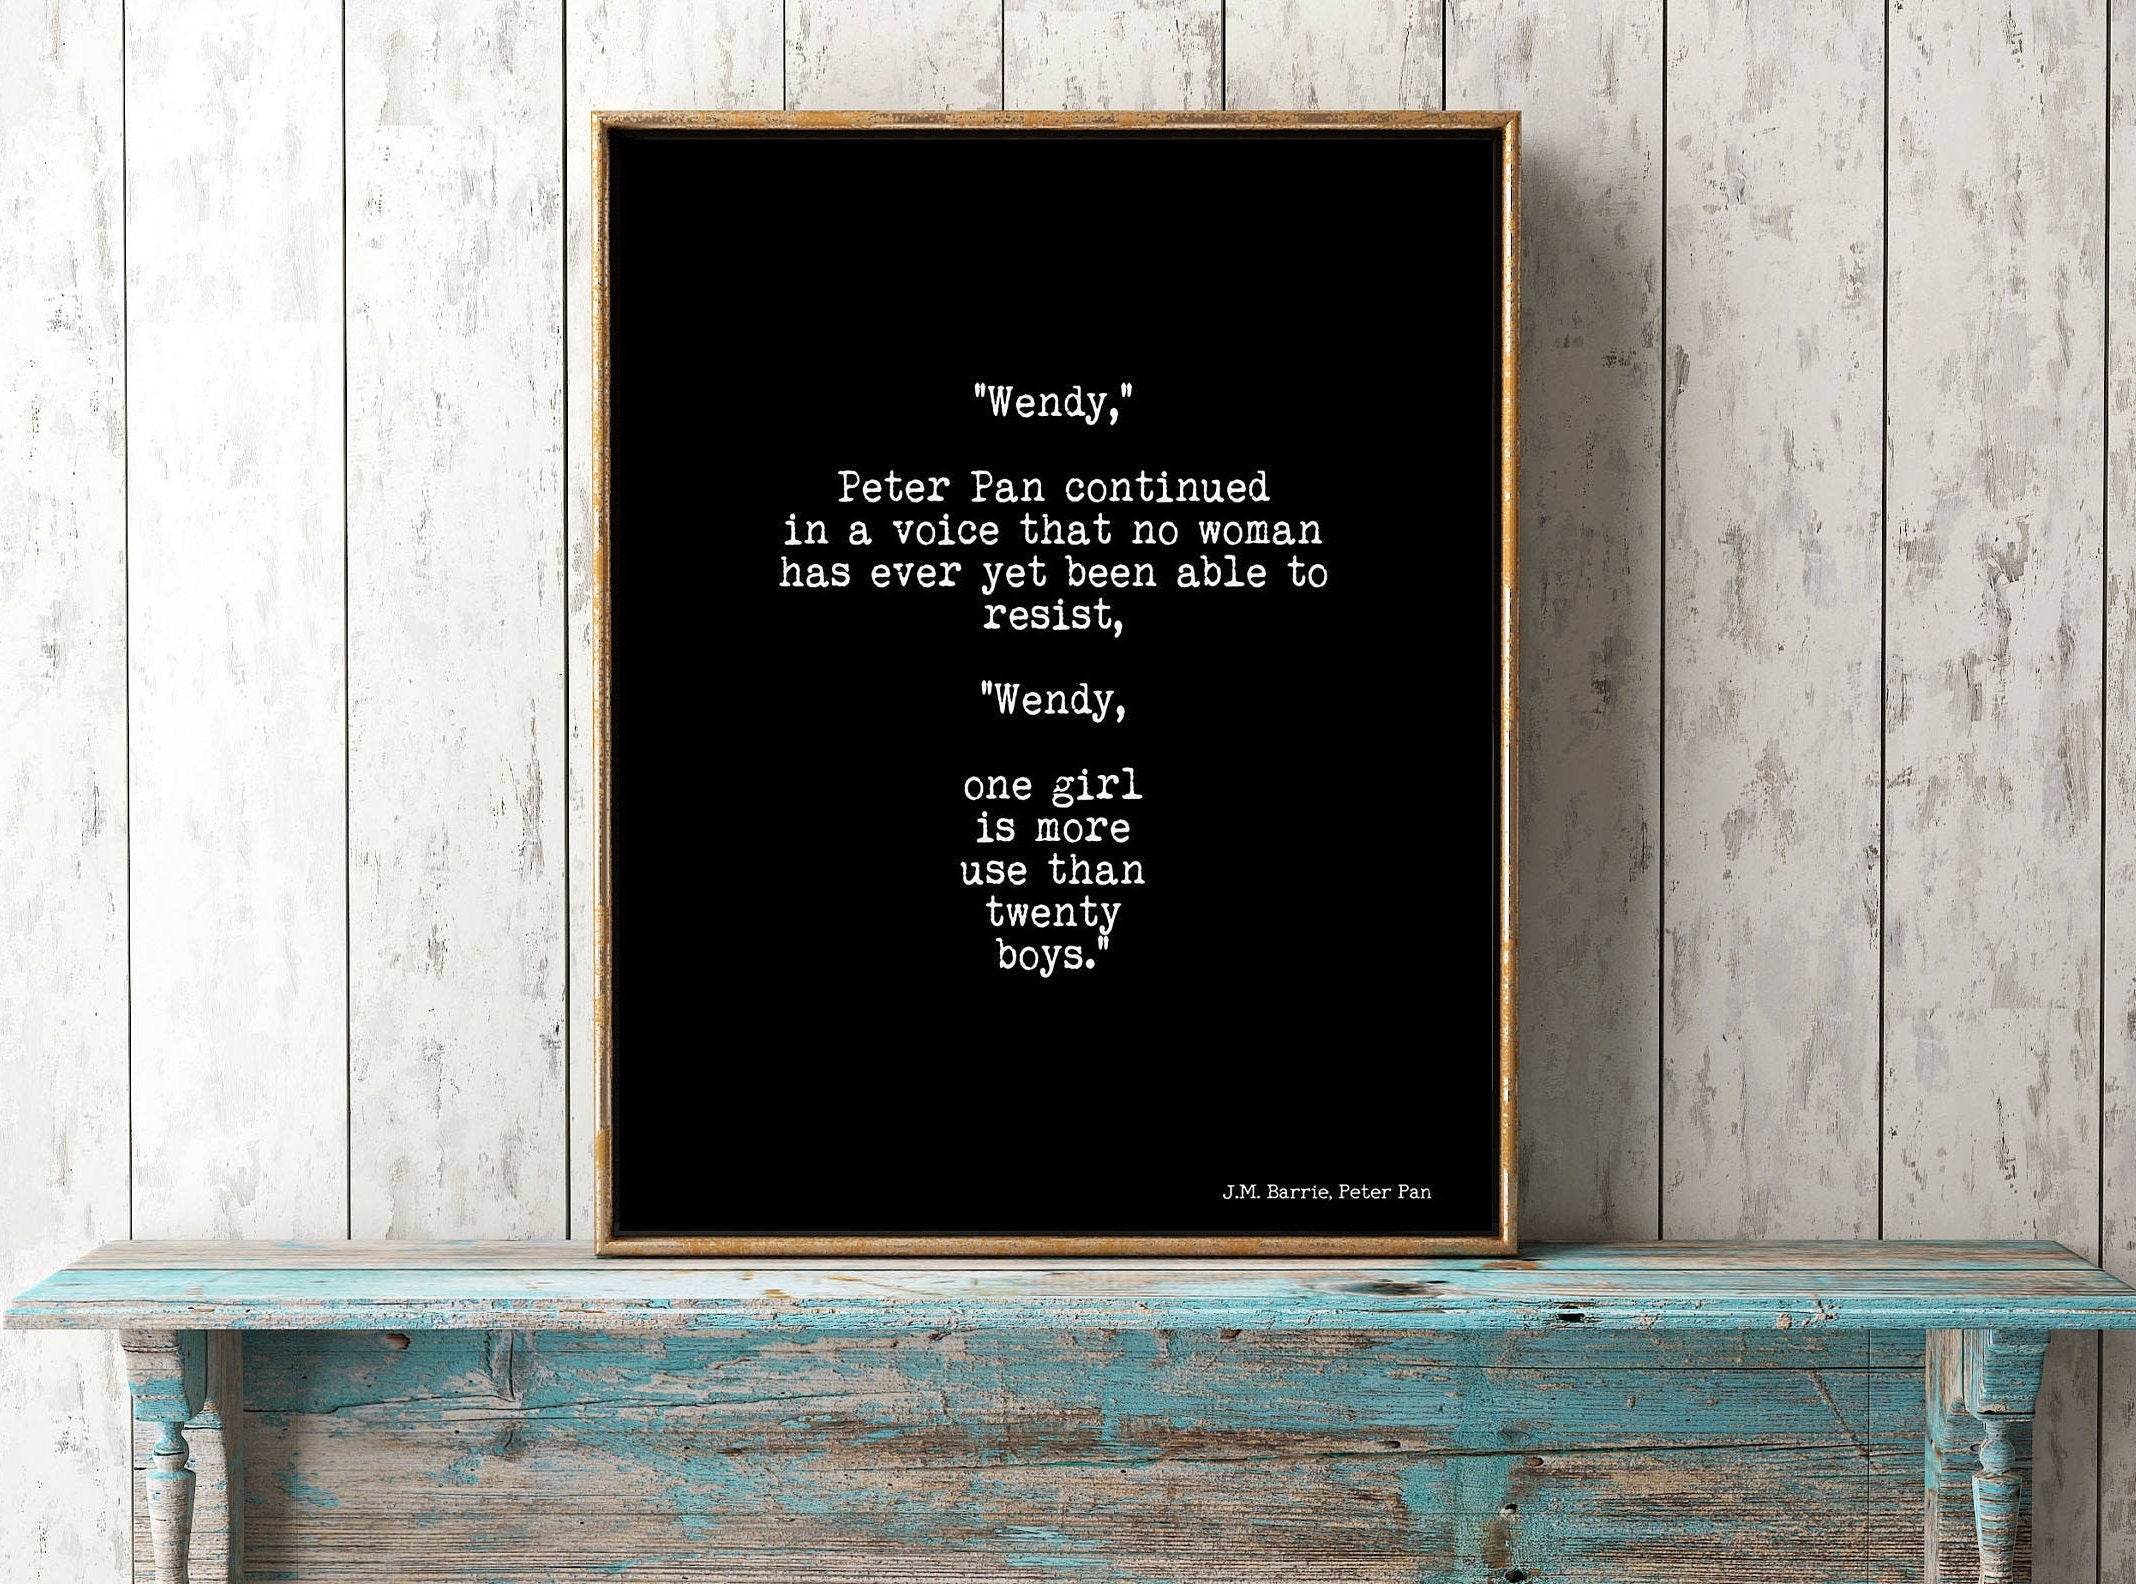 Peter Pan One Girl Is More Use Than Twenty Boys Girl Power Quote Wall Art Prints, Unframed Wall Decor in Black and White